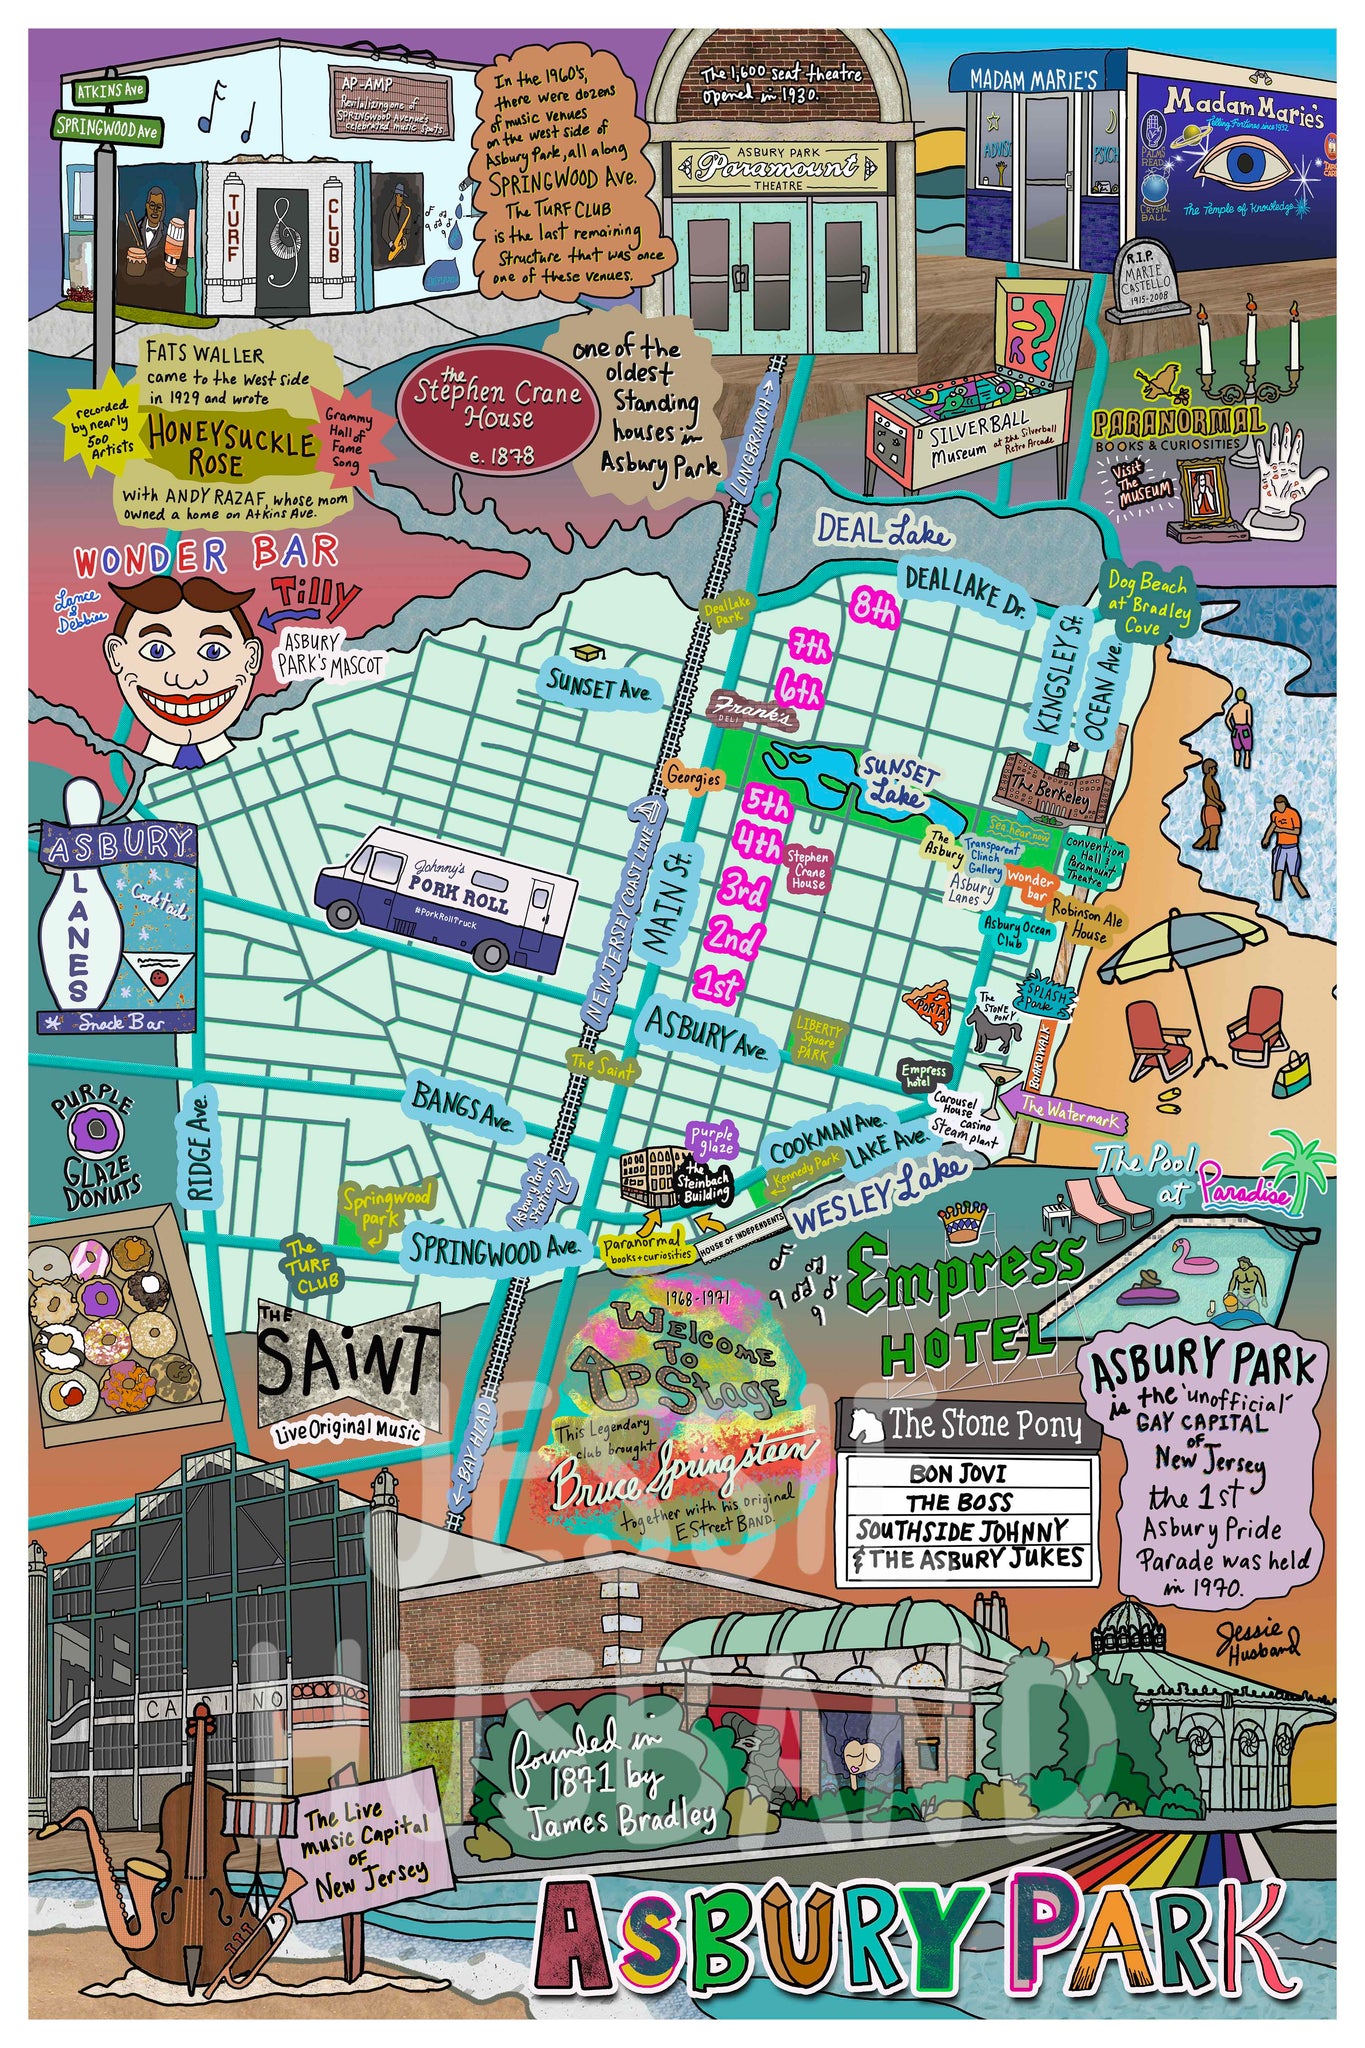 Map of Asbury Park, New Jersey (customization and framing options available)